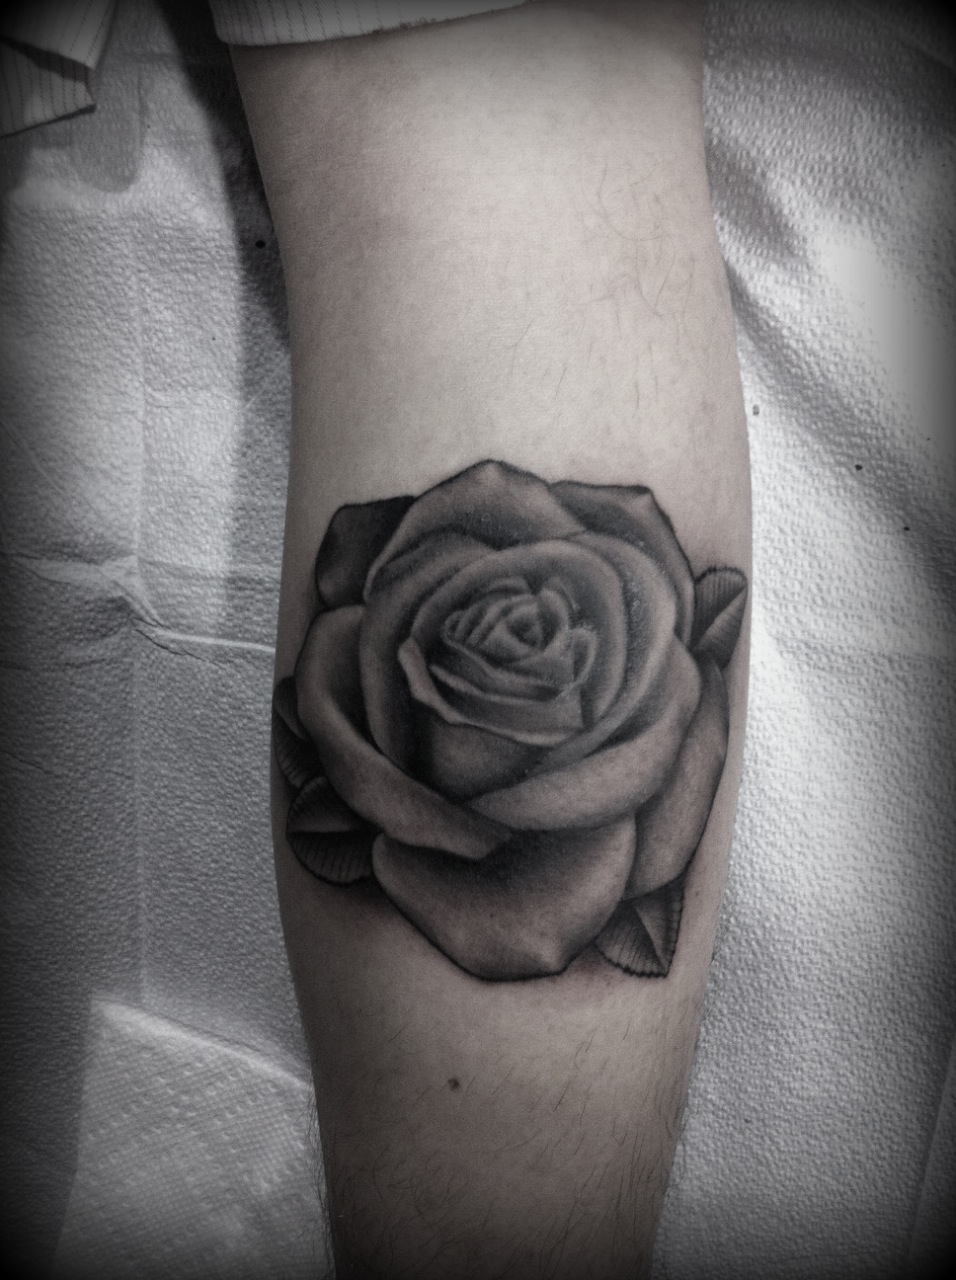 Black and grey rose. I love tattooing stuff like this.